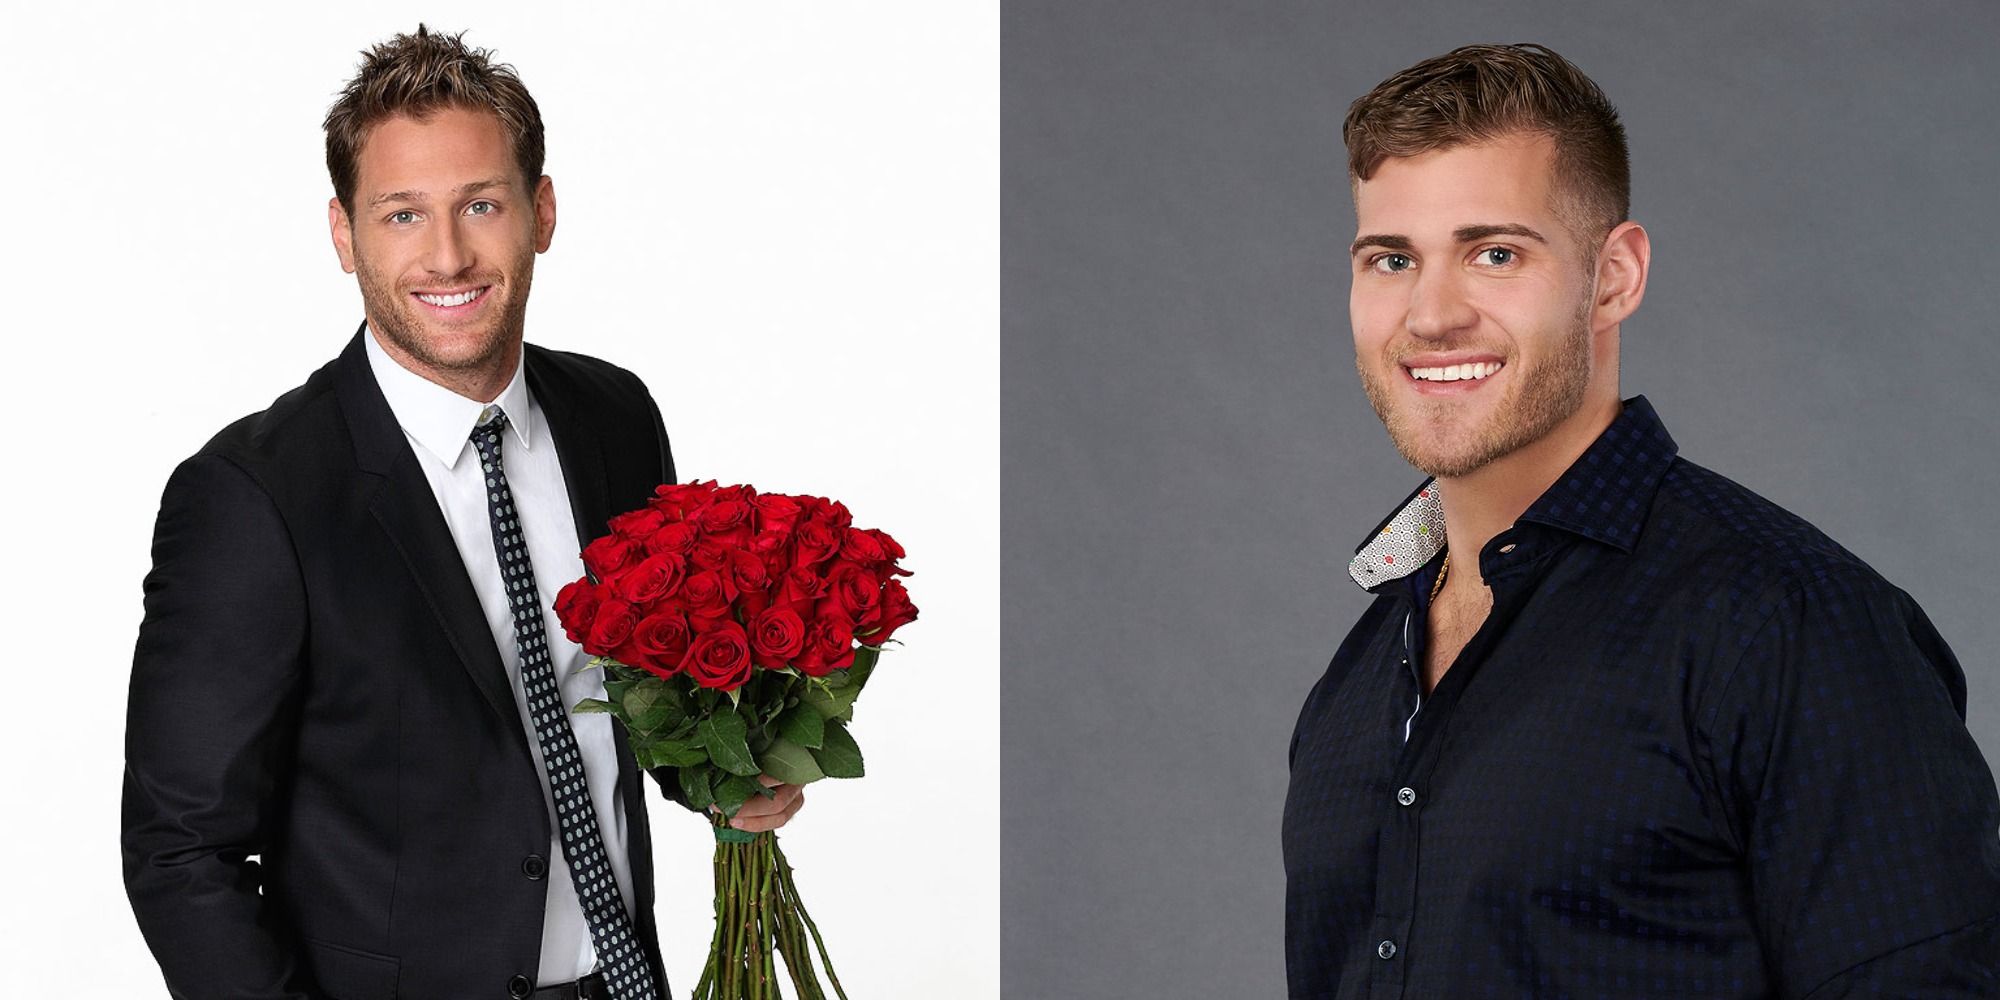 Two fan favorite Bachelorette contestants who ended up being villains.